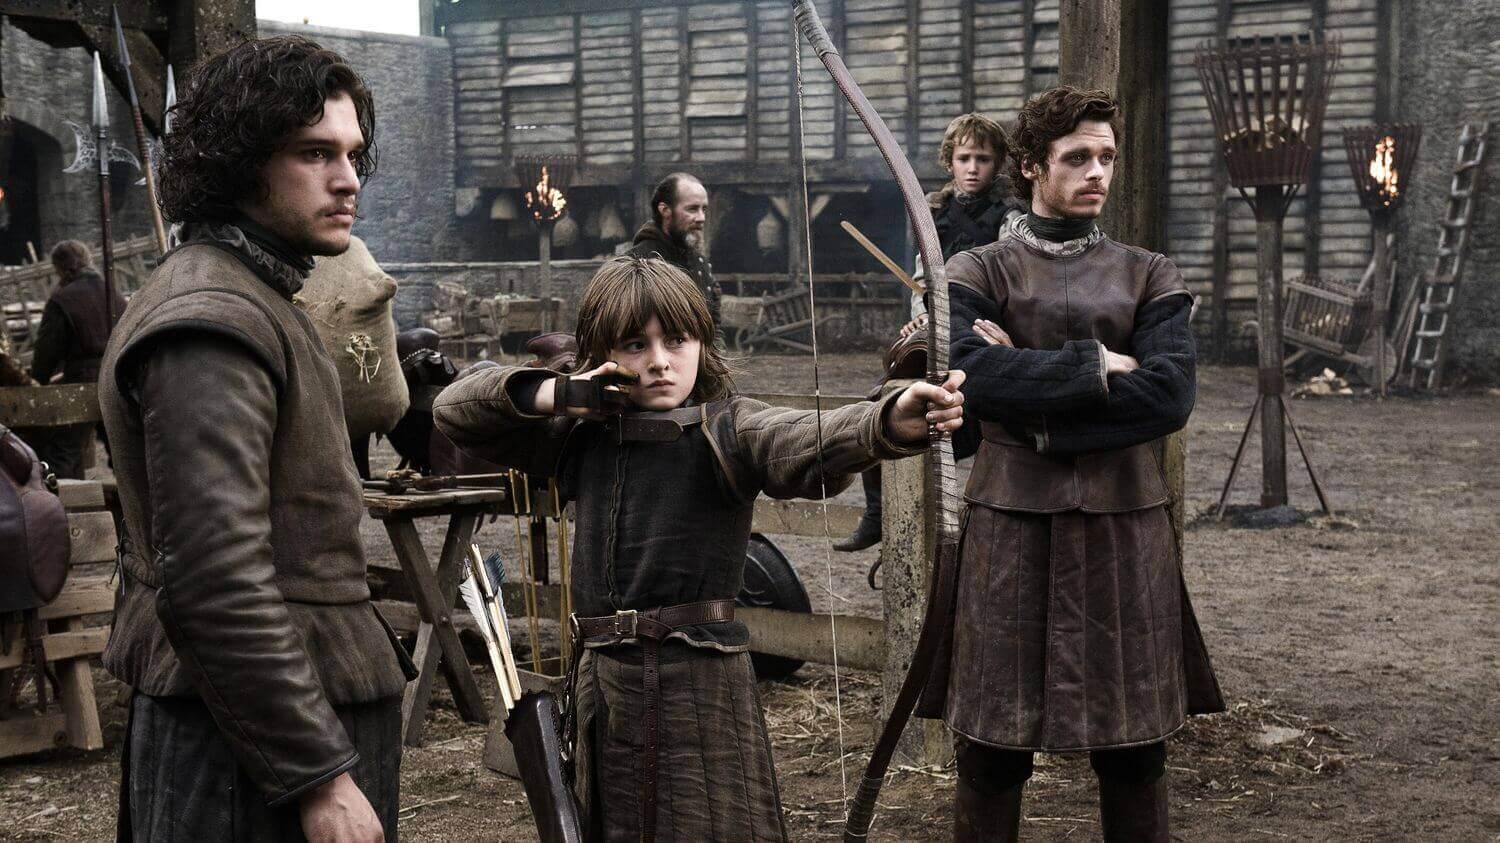 A child shooting an arrow in a scene from Game of Thrones.